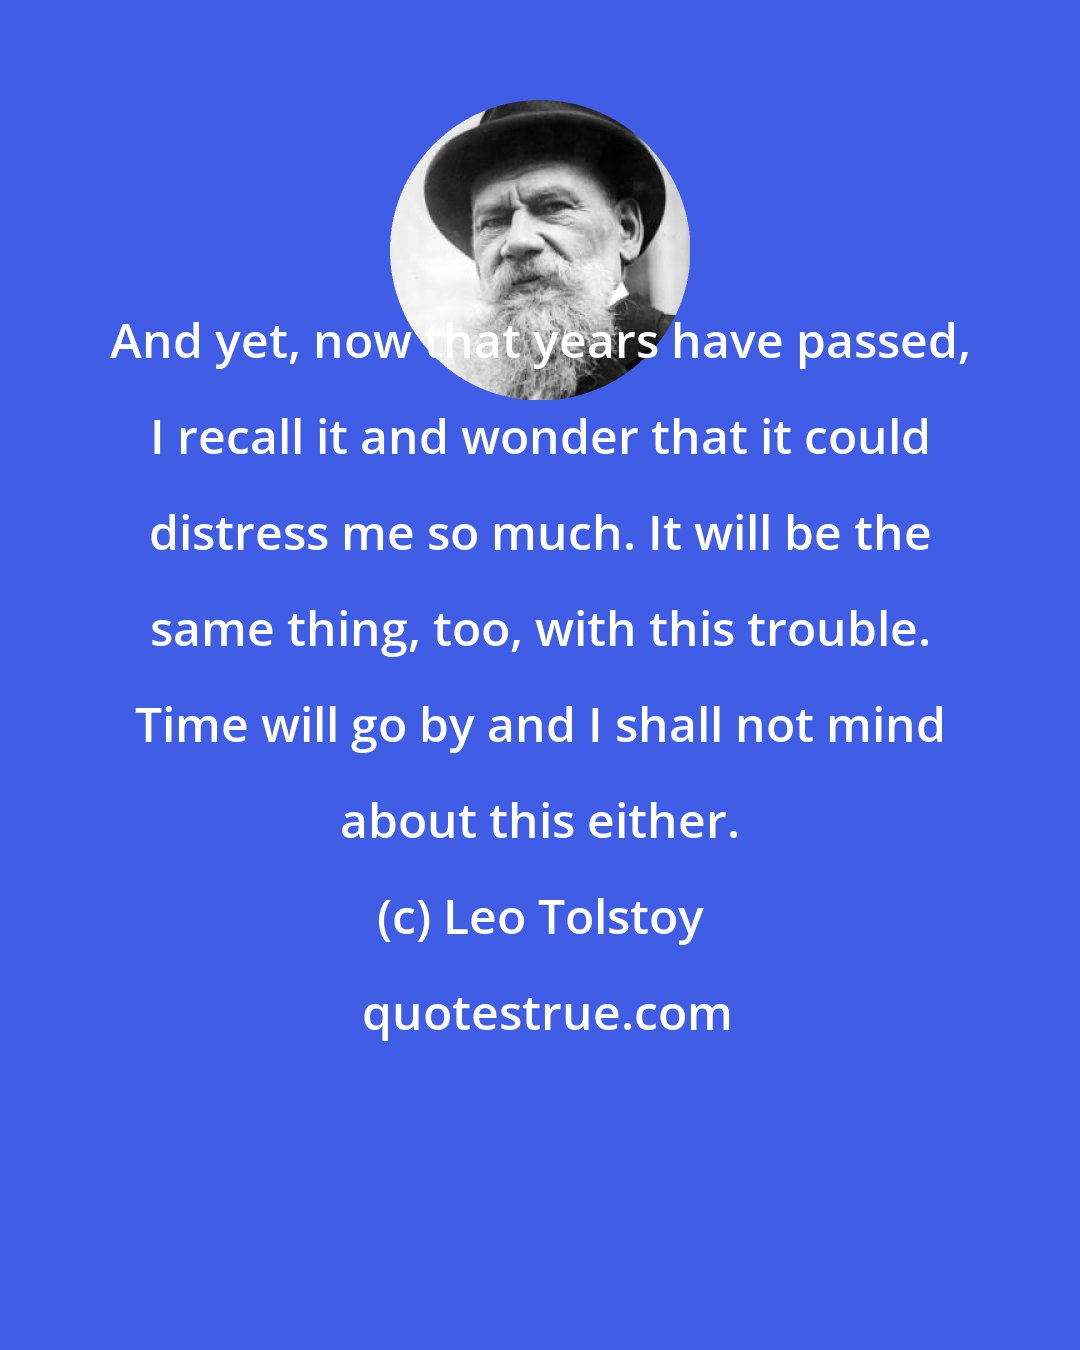 Leo Tolstoy: And yet, now that years have passed, I recall it and wonder that it could distress me so much. It will be the same thing, too, with this trouble. Time will go by and I shall not mind about this either.